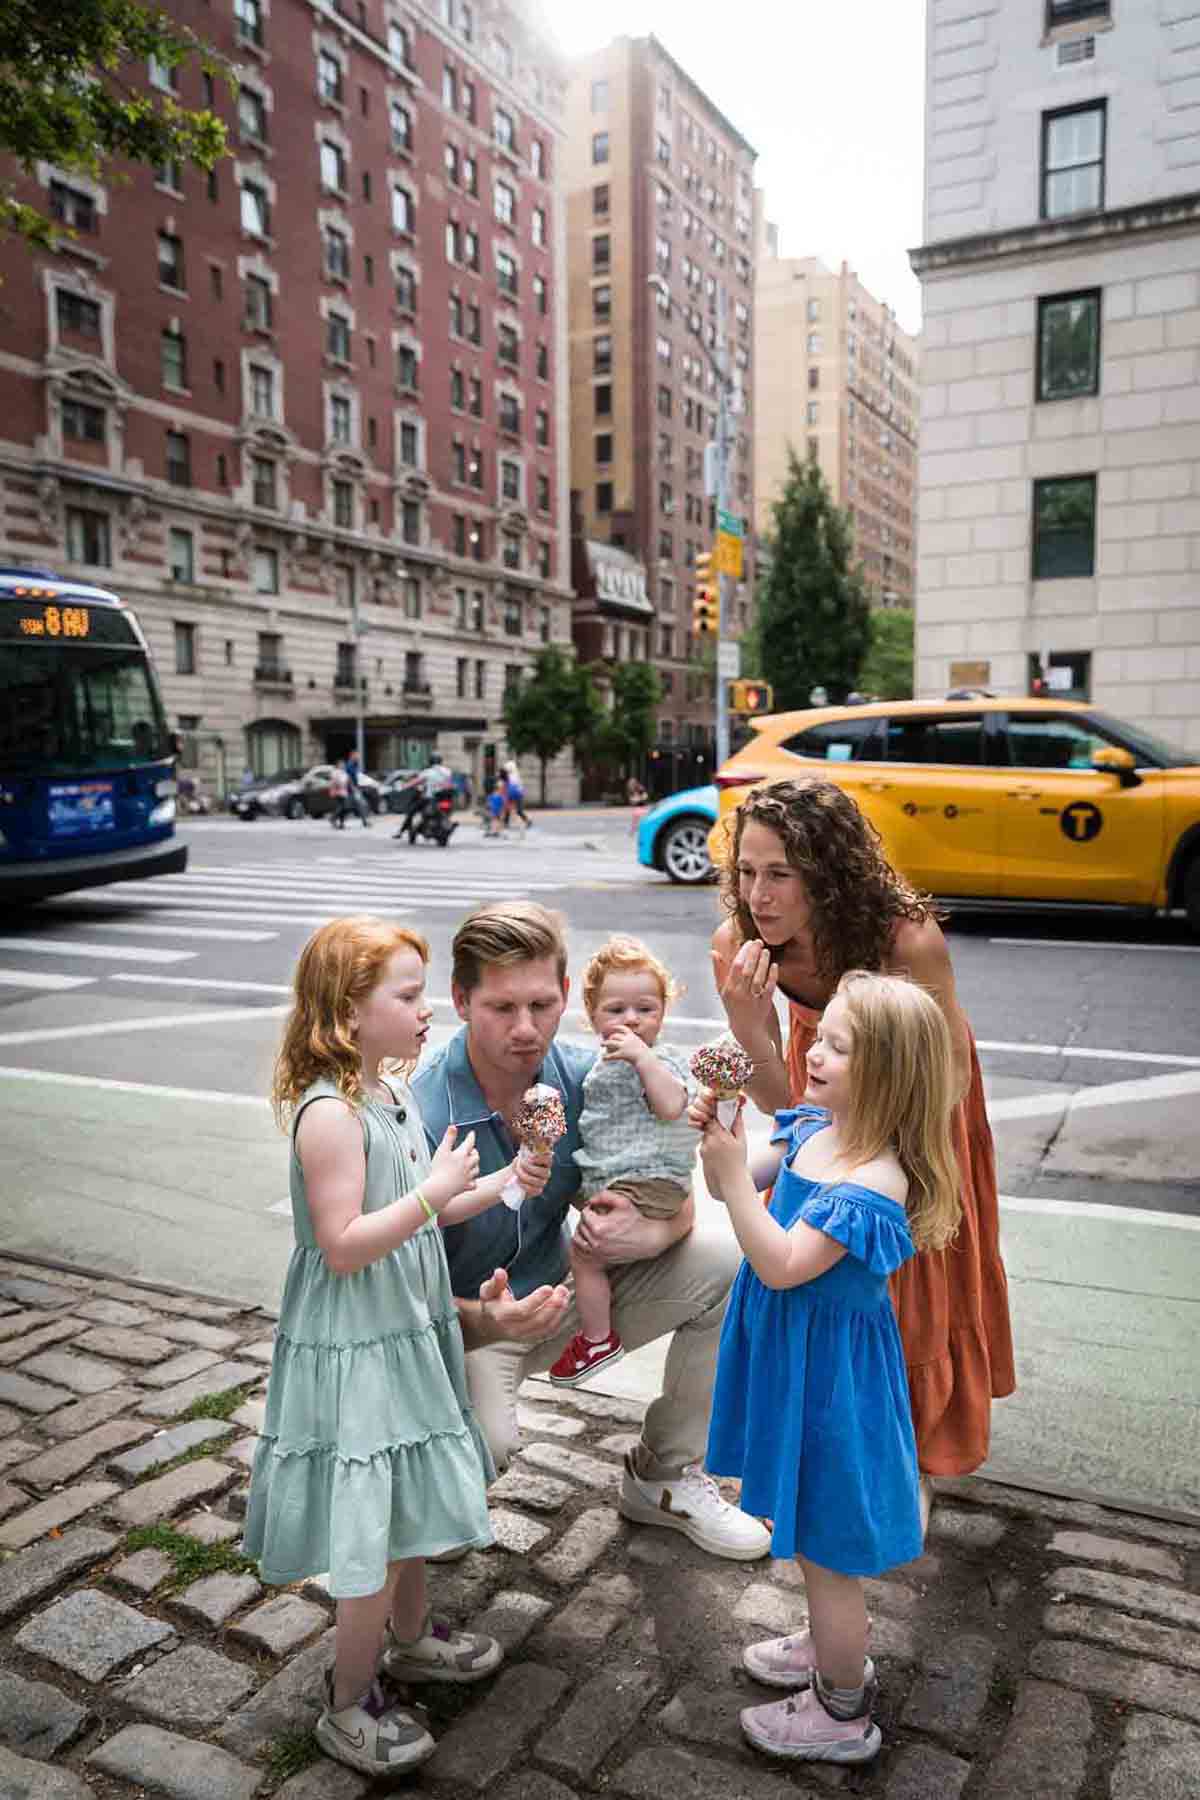 Family eating ice cream on a NYC sidewalk with yellow taxi in background